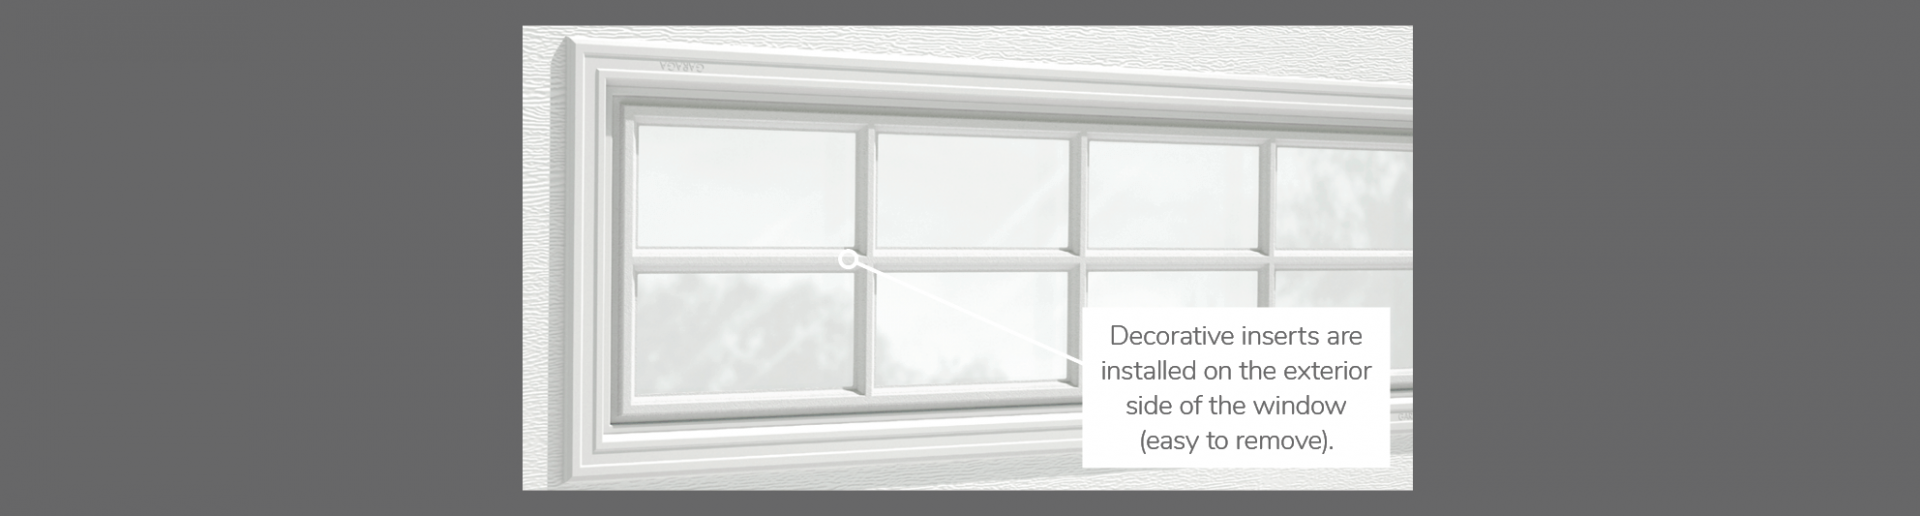 Stockton Decorative Insert, 21" x 13" and 40" x 13", available for door R-16, R-12